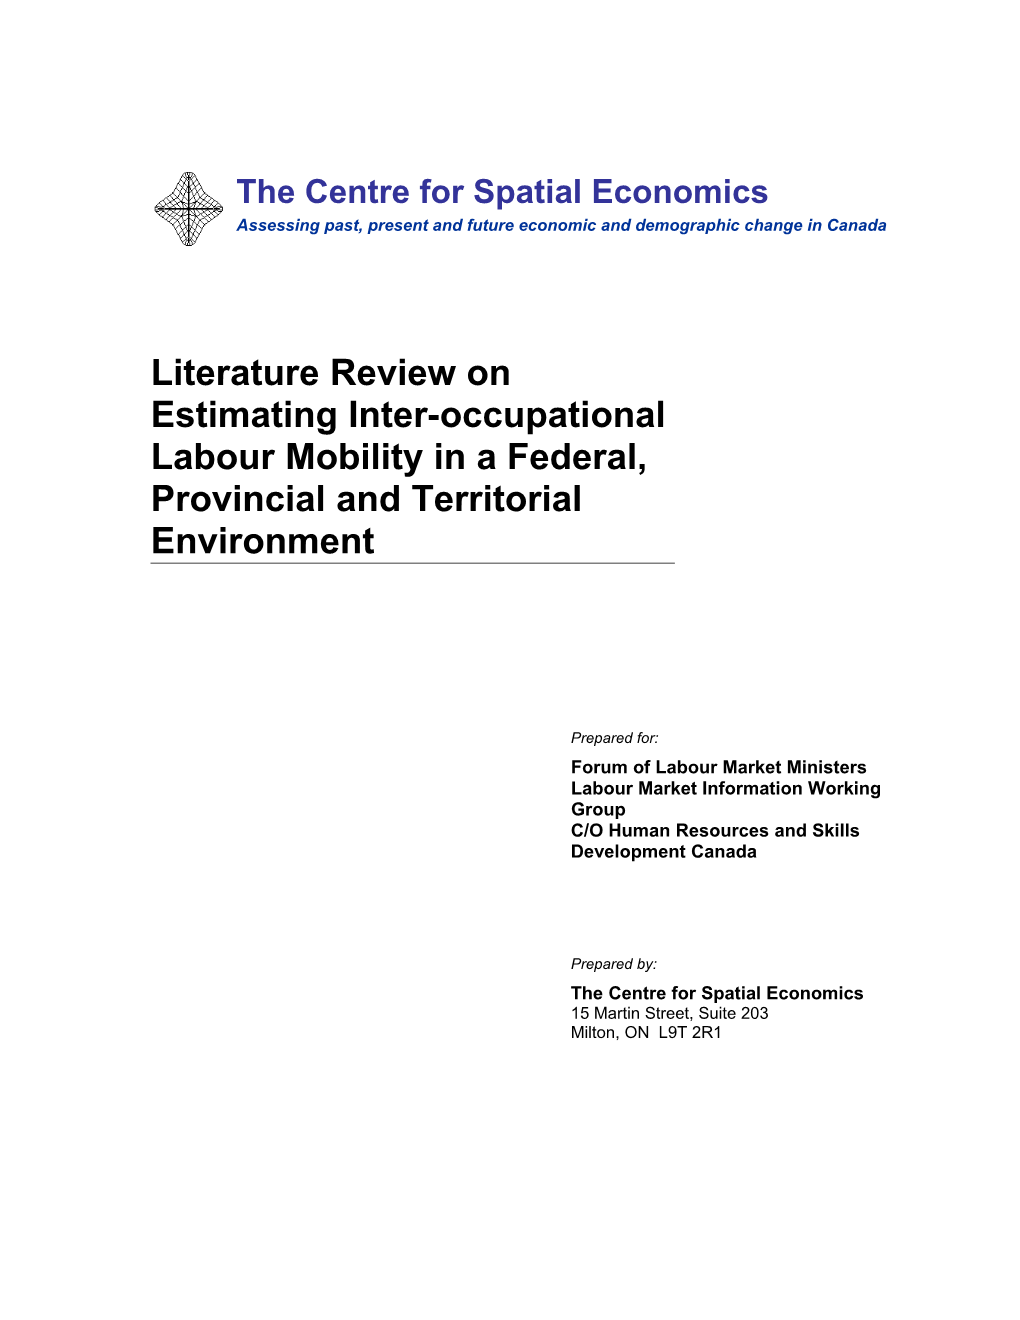 Literature Review Onestimating Inter-Occupational Labour Mobility Ina Federal, Provincial